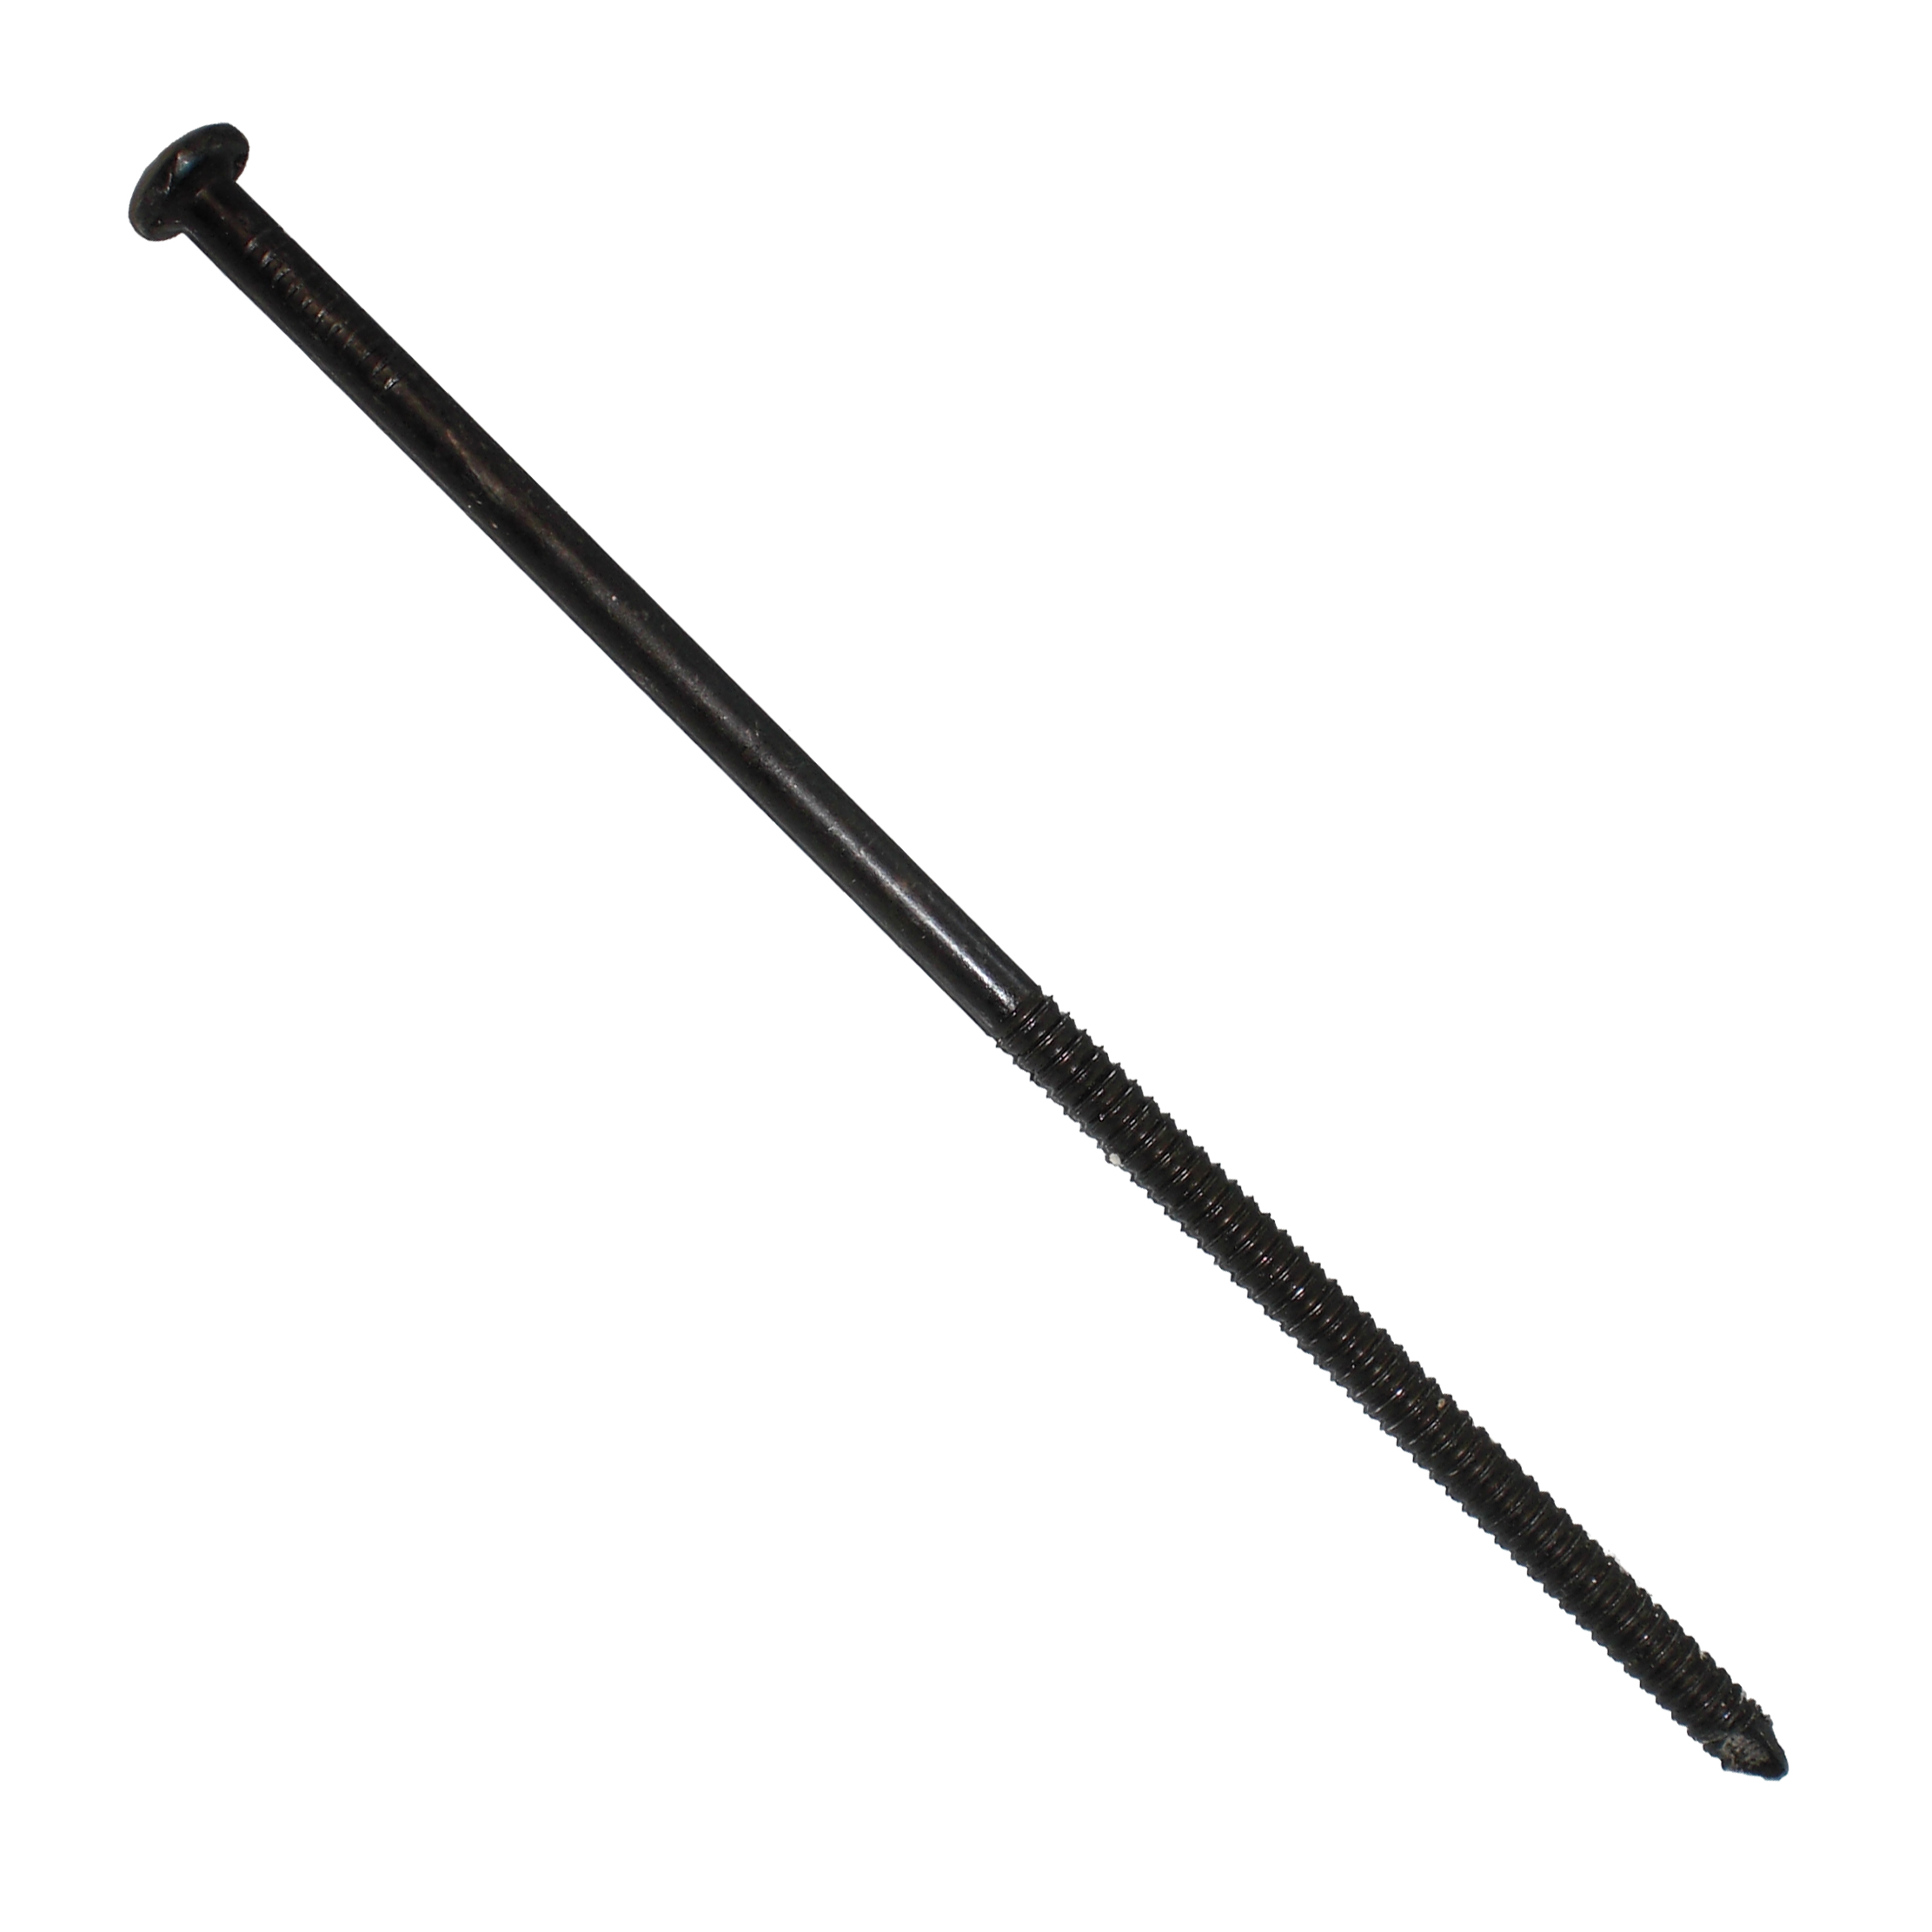 Amazon.com: MAZE NAILS H526A-5 Pole Barn Ring Shank Nails, 5-Pound 20D  4-Inch : Industrial & Scientific